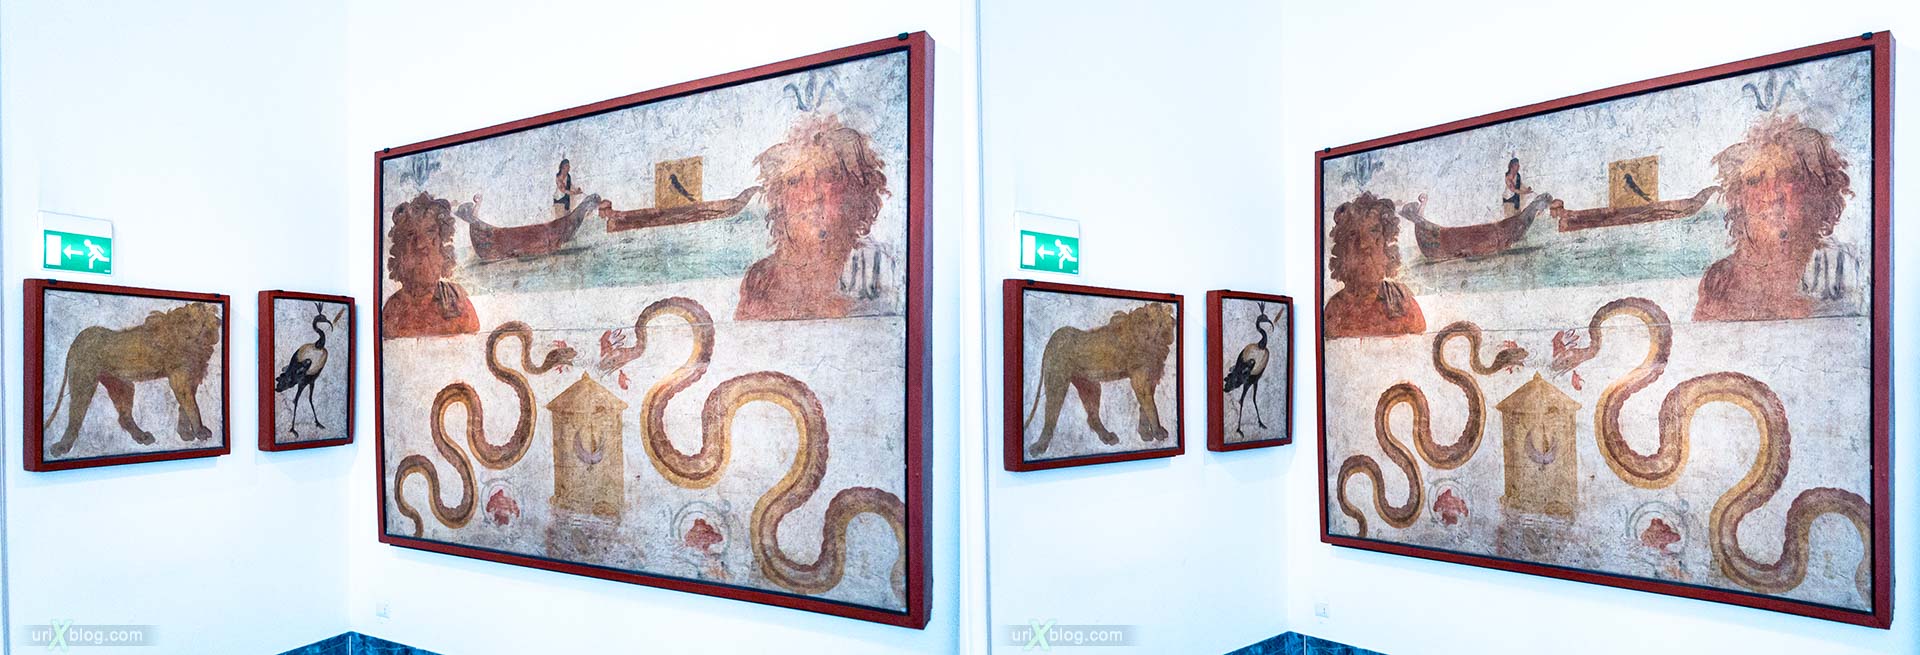 frescoes, National Archaeological Museum of Naples, ancient Rome, Pompei, exhibition, Naples, Italy, 3D, stereo pair, cross-eyed, crossview, cross view stereo pair, stereoscopic